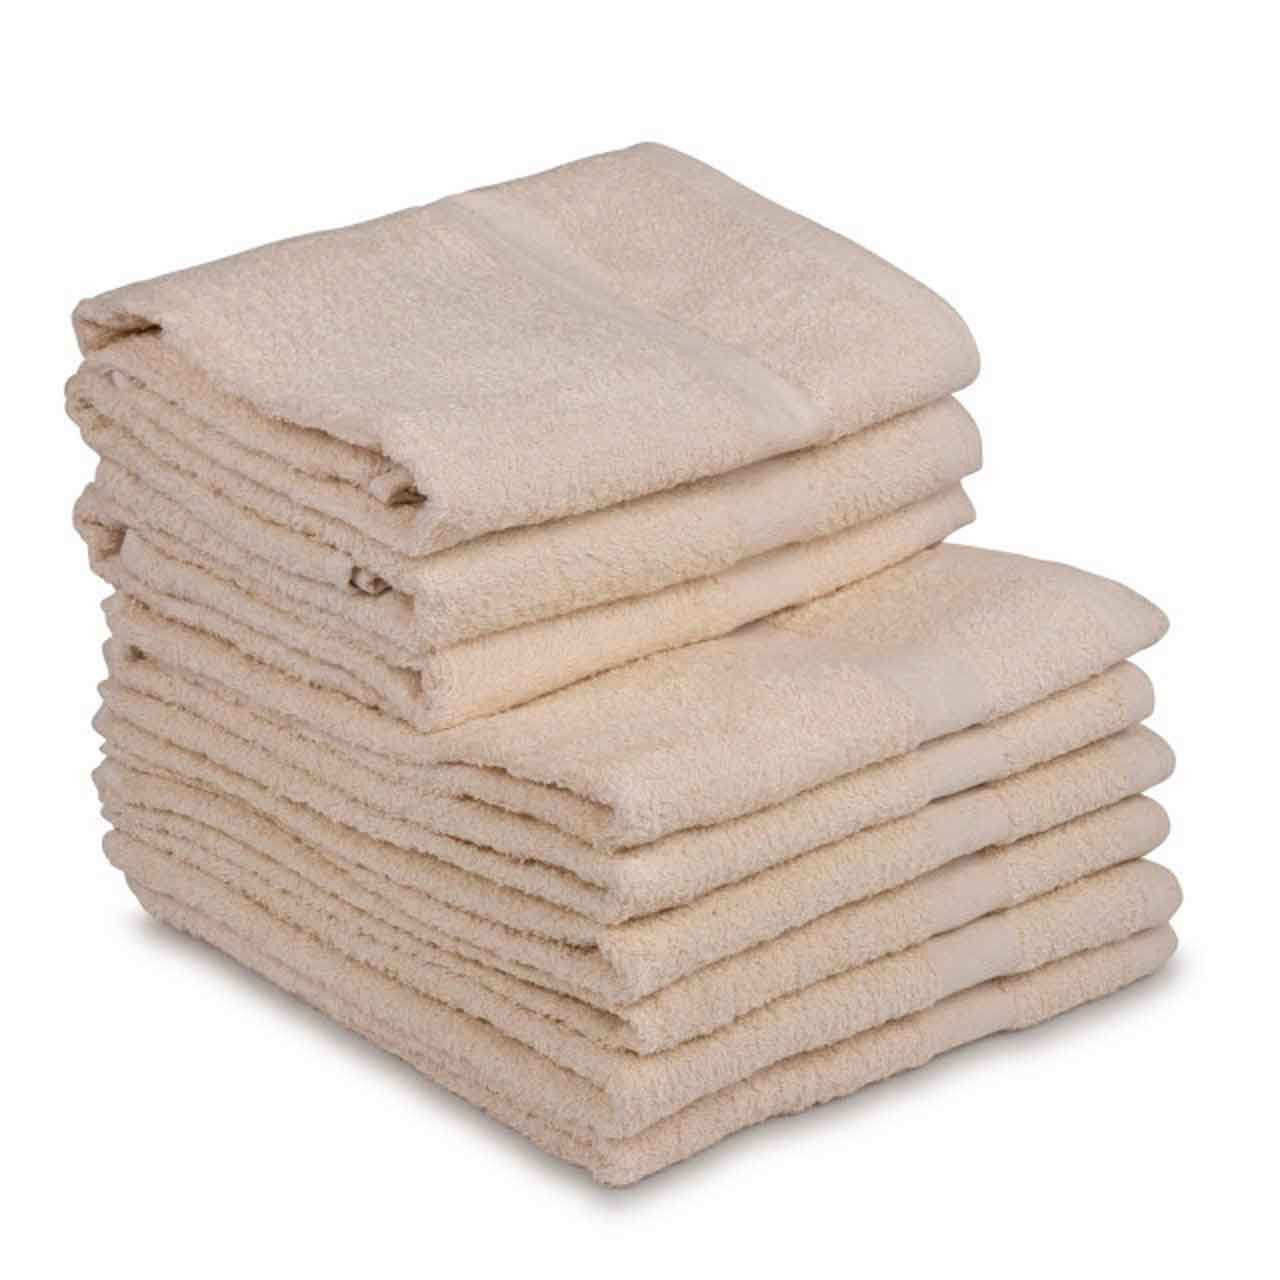 Can I order a sample of the ecru towels before purchasing?